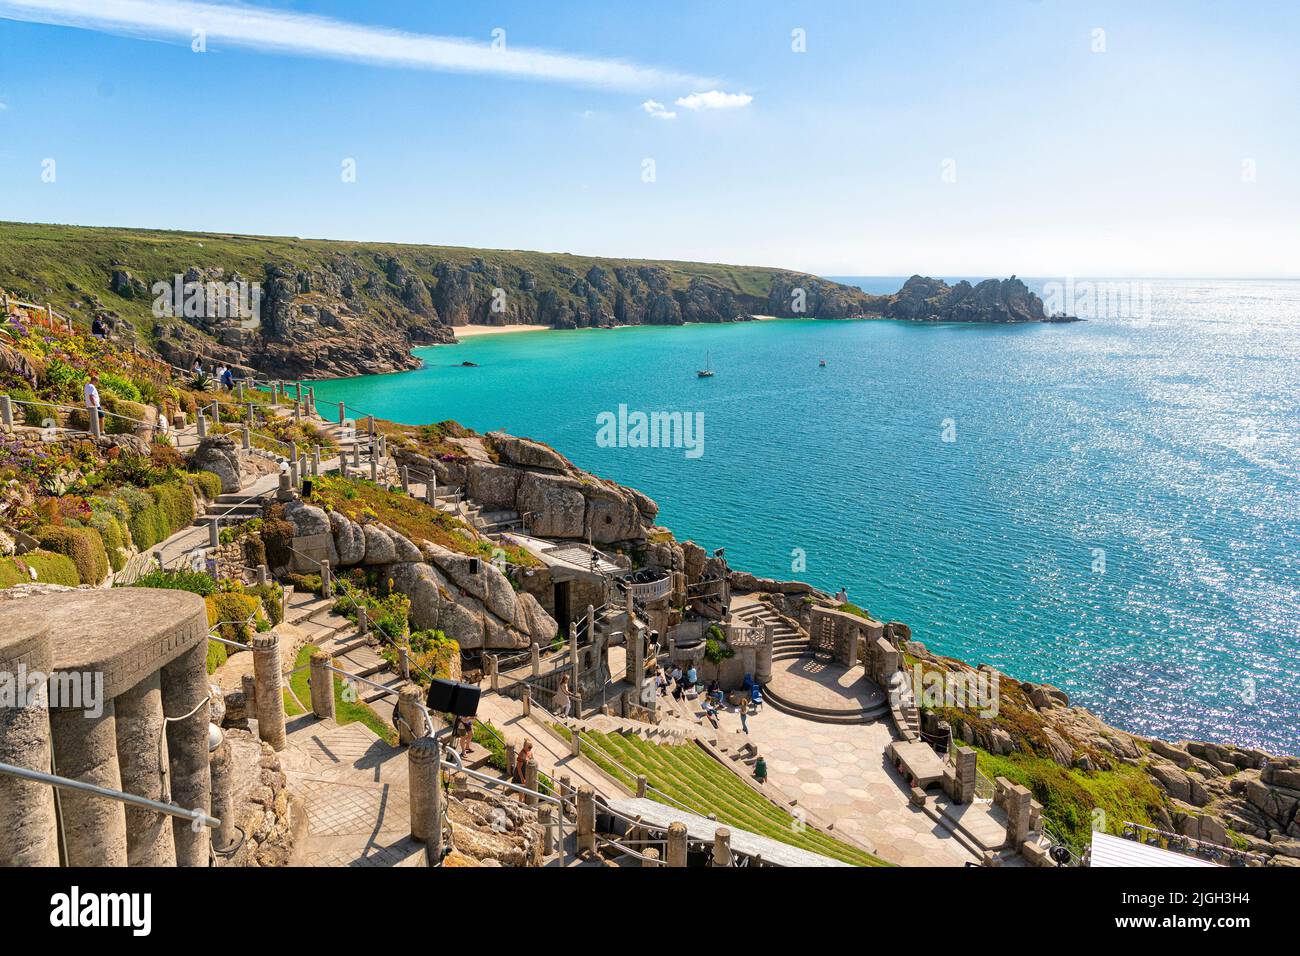 The Minack Theatre ,Porthcurno beach Looking out from Minack Theatre you will see Porthcurno beach below. Porthcurno is one of the nicest beaches in C Stock Photo